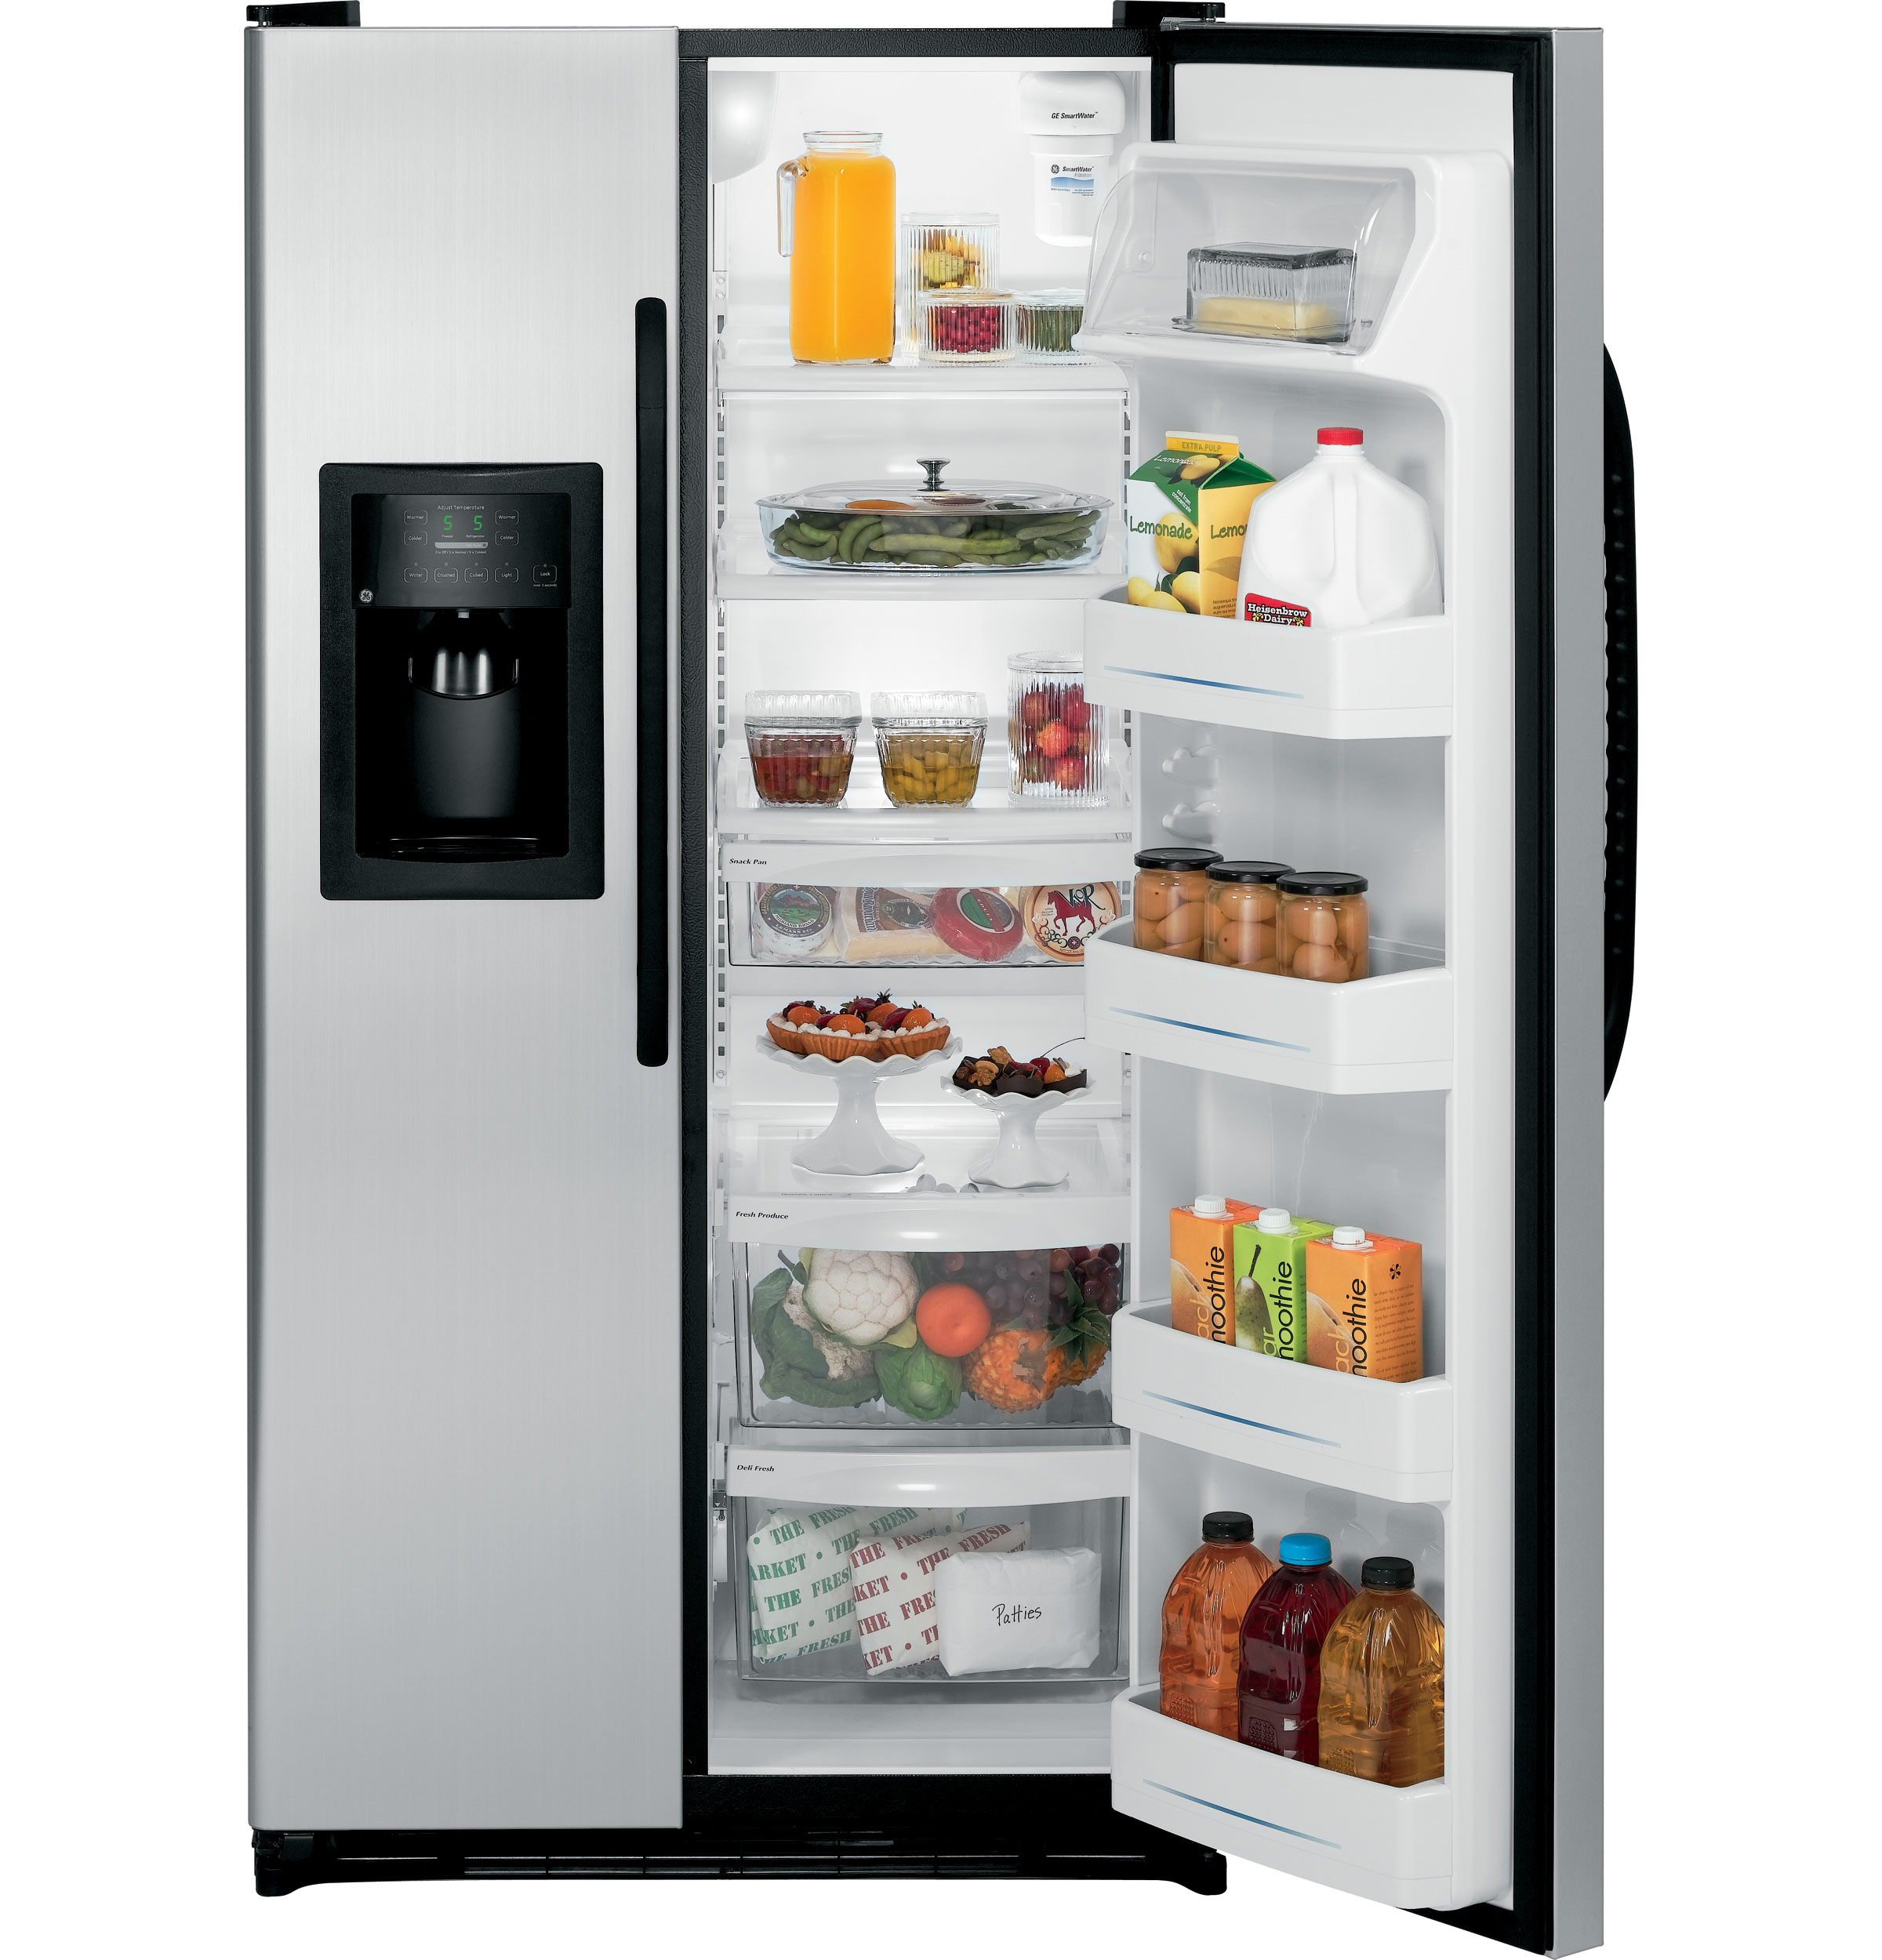 GE® ENERGY STAR® 22.0 Cu. Ft. Side-By-Side Refrigerator with Dispenser